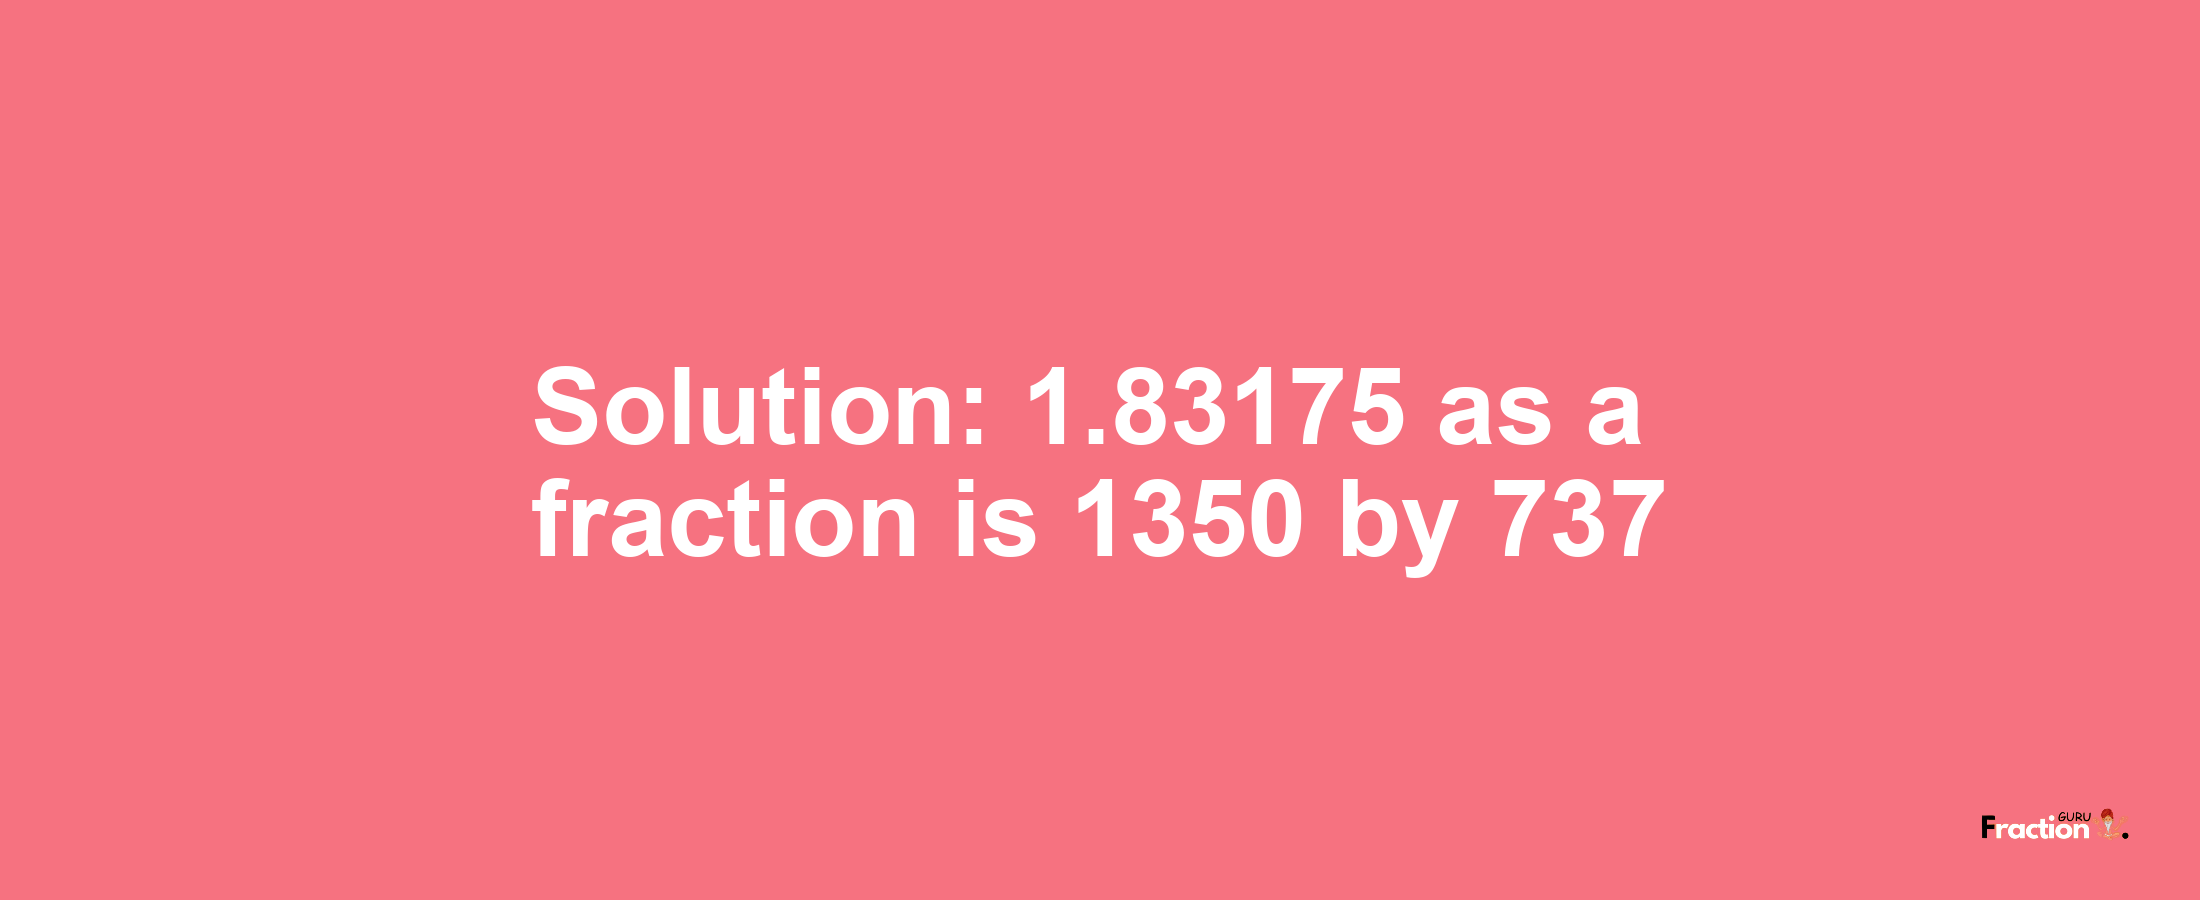 Solution:1.83175 as a fraction is 1350/737